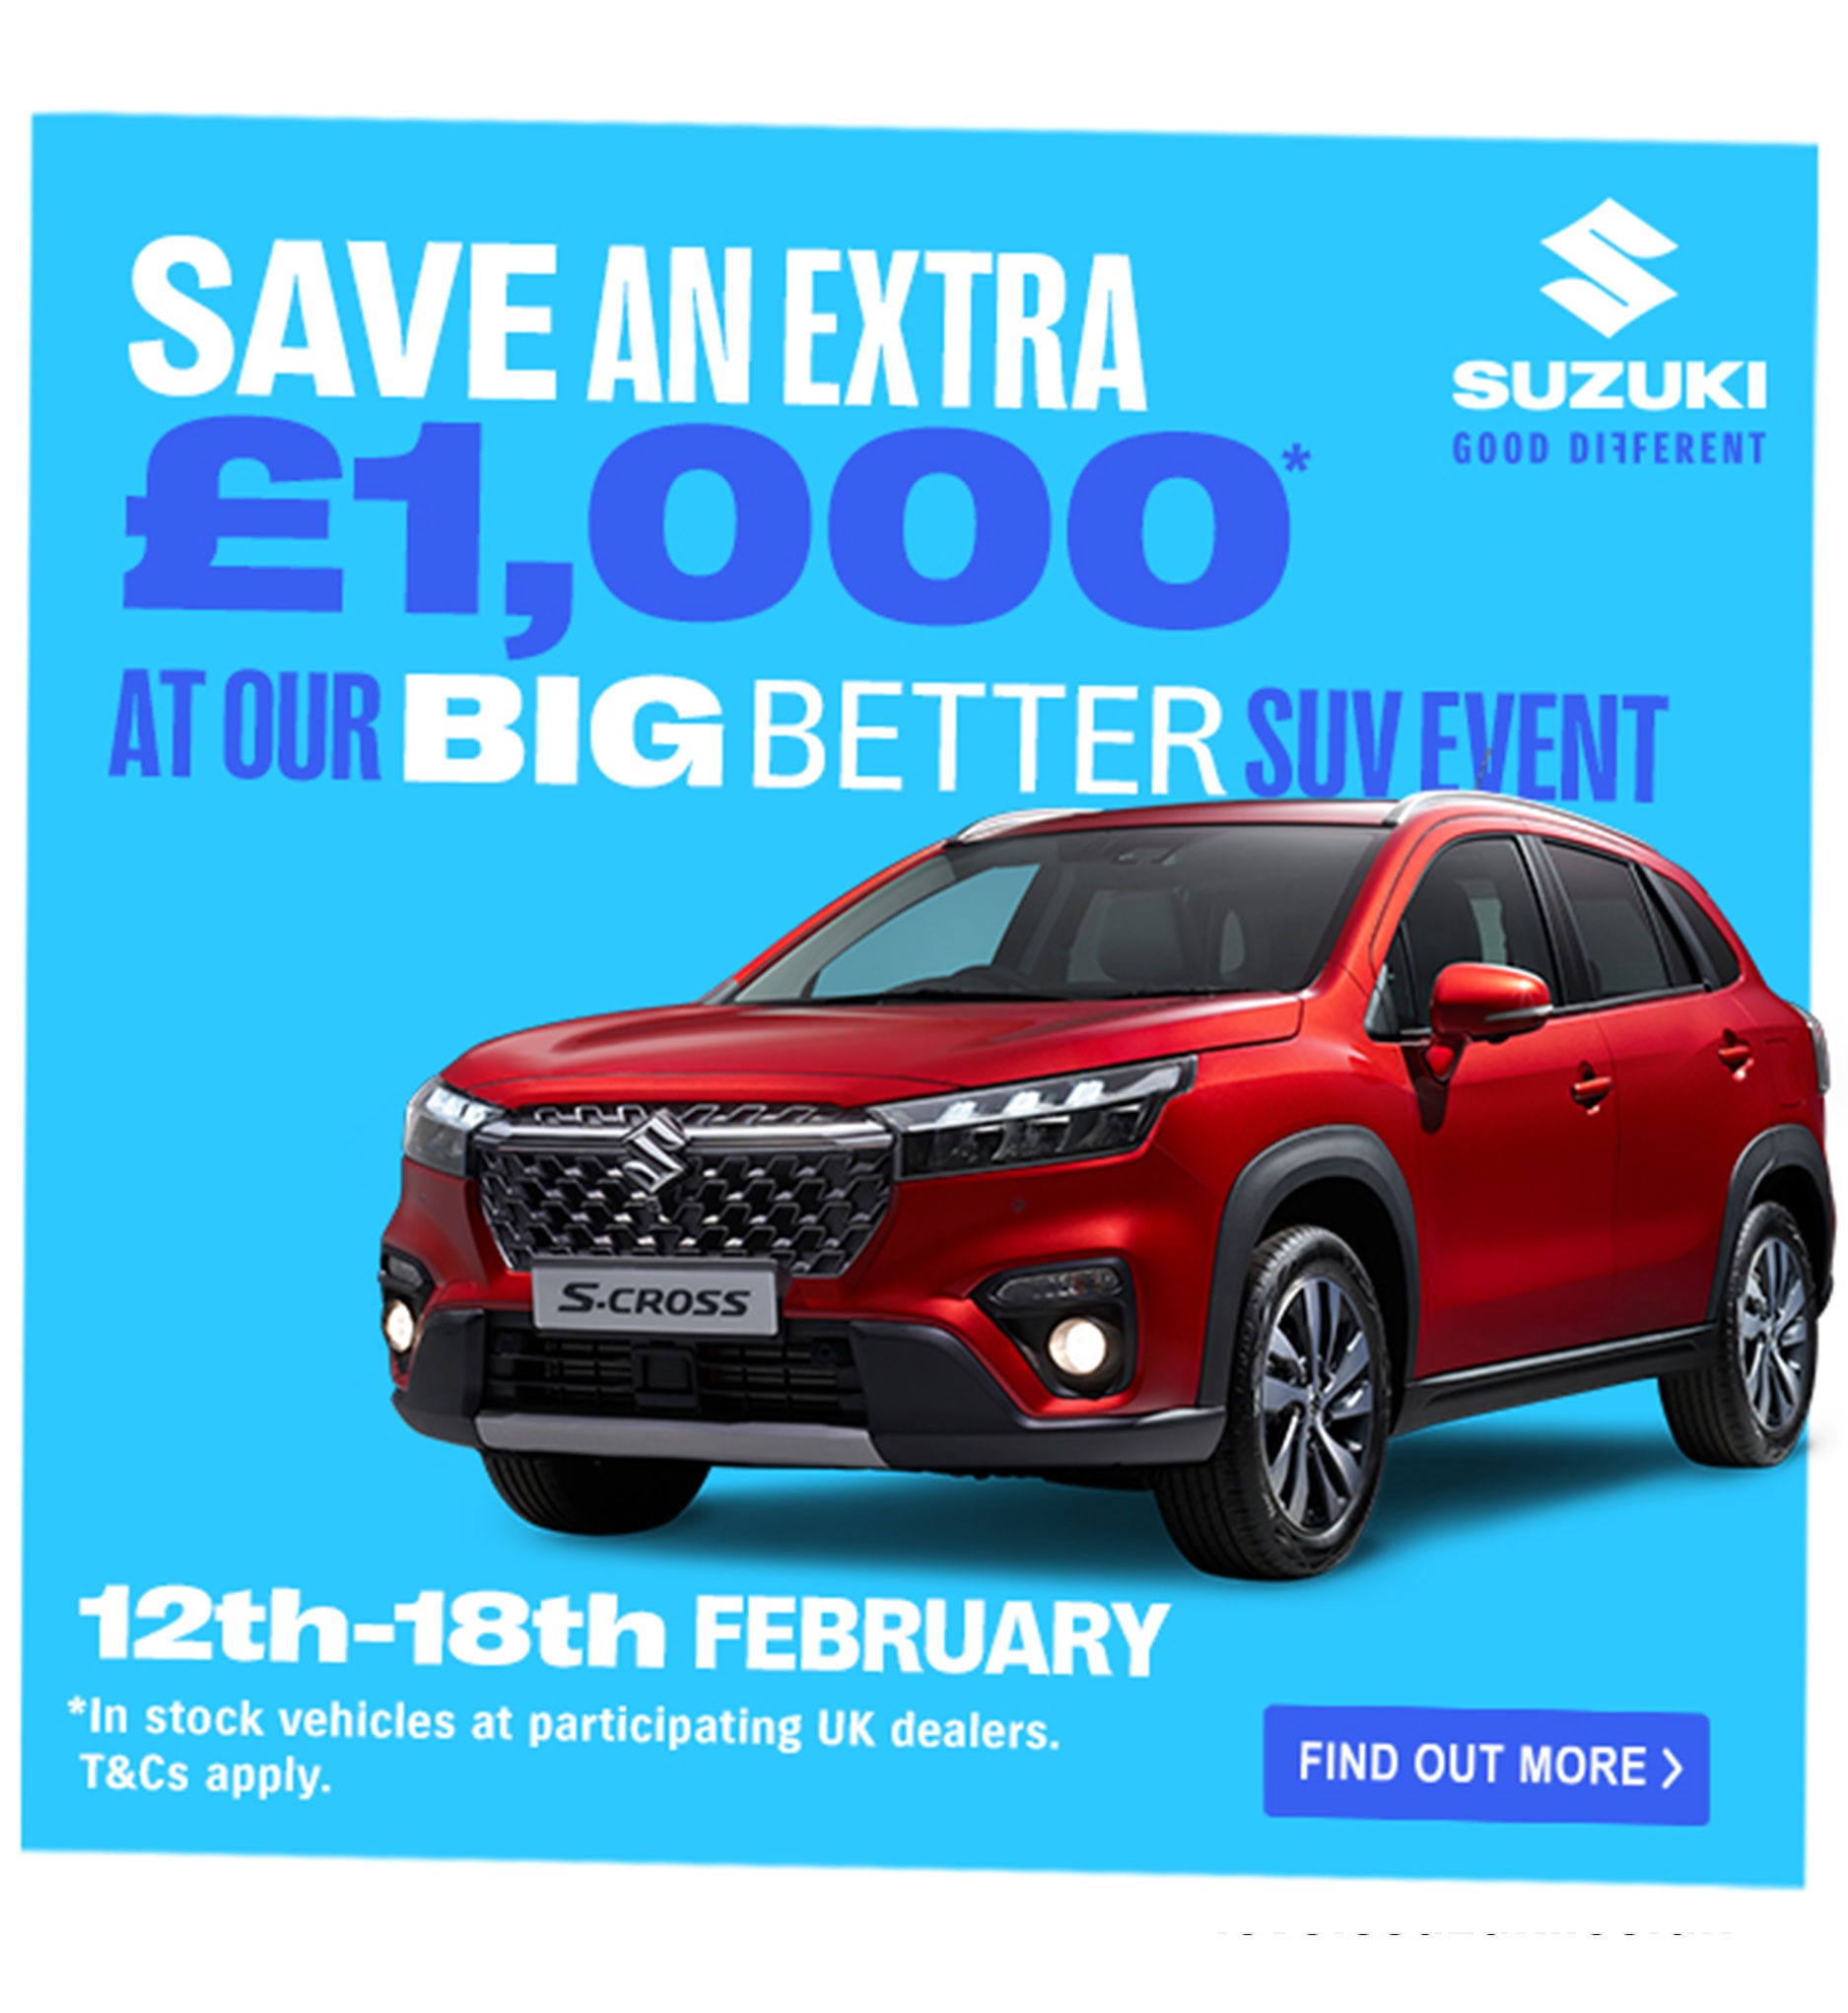 The Big Better SUV Event